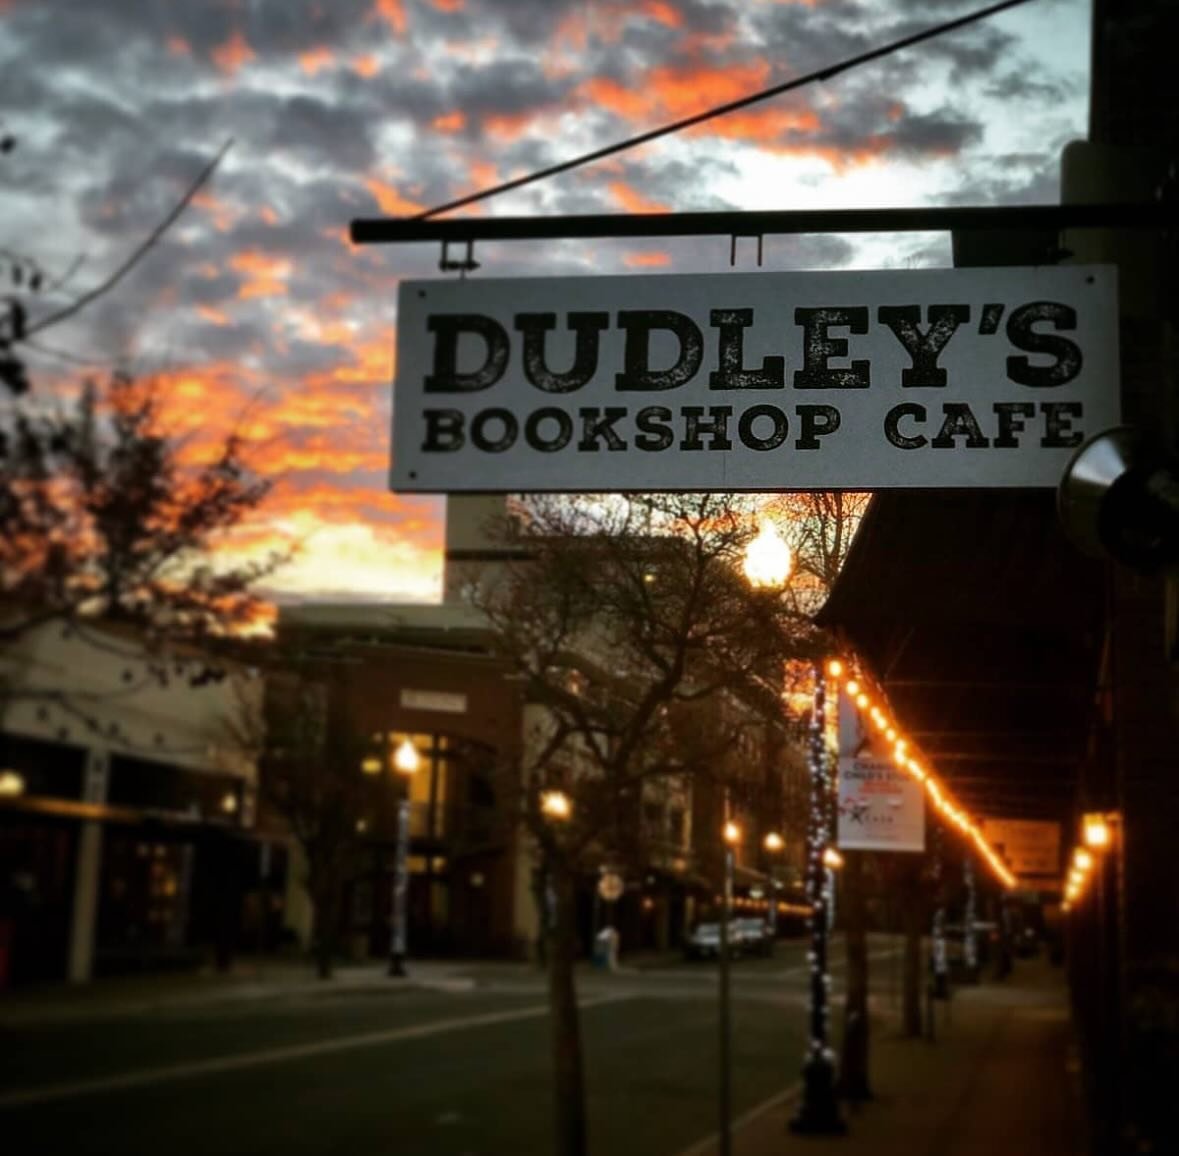 Our favorite Bookstore Cafe just celebrated 9 years of business under their current owner Tom! Stop into @dudleysbookshopbend for the best book recommendations, amazing coffee, great pastries and ideal bookstore vibes. Cheers Dudley&rsquo;s, you brin